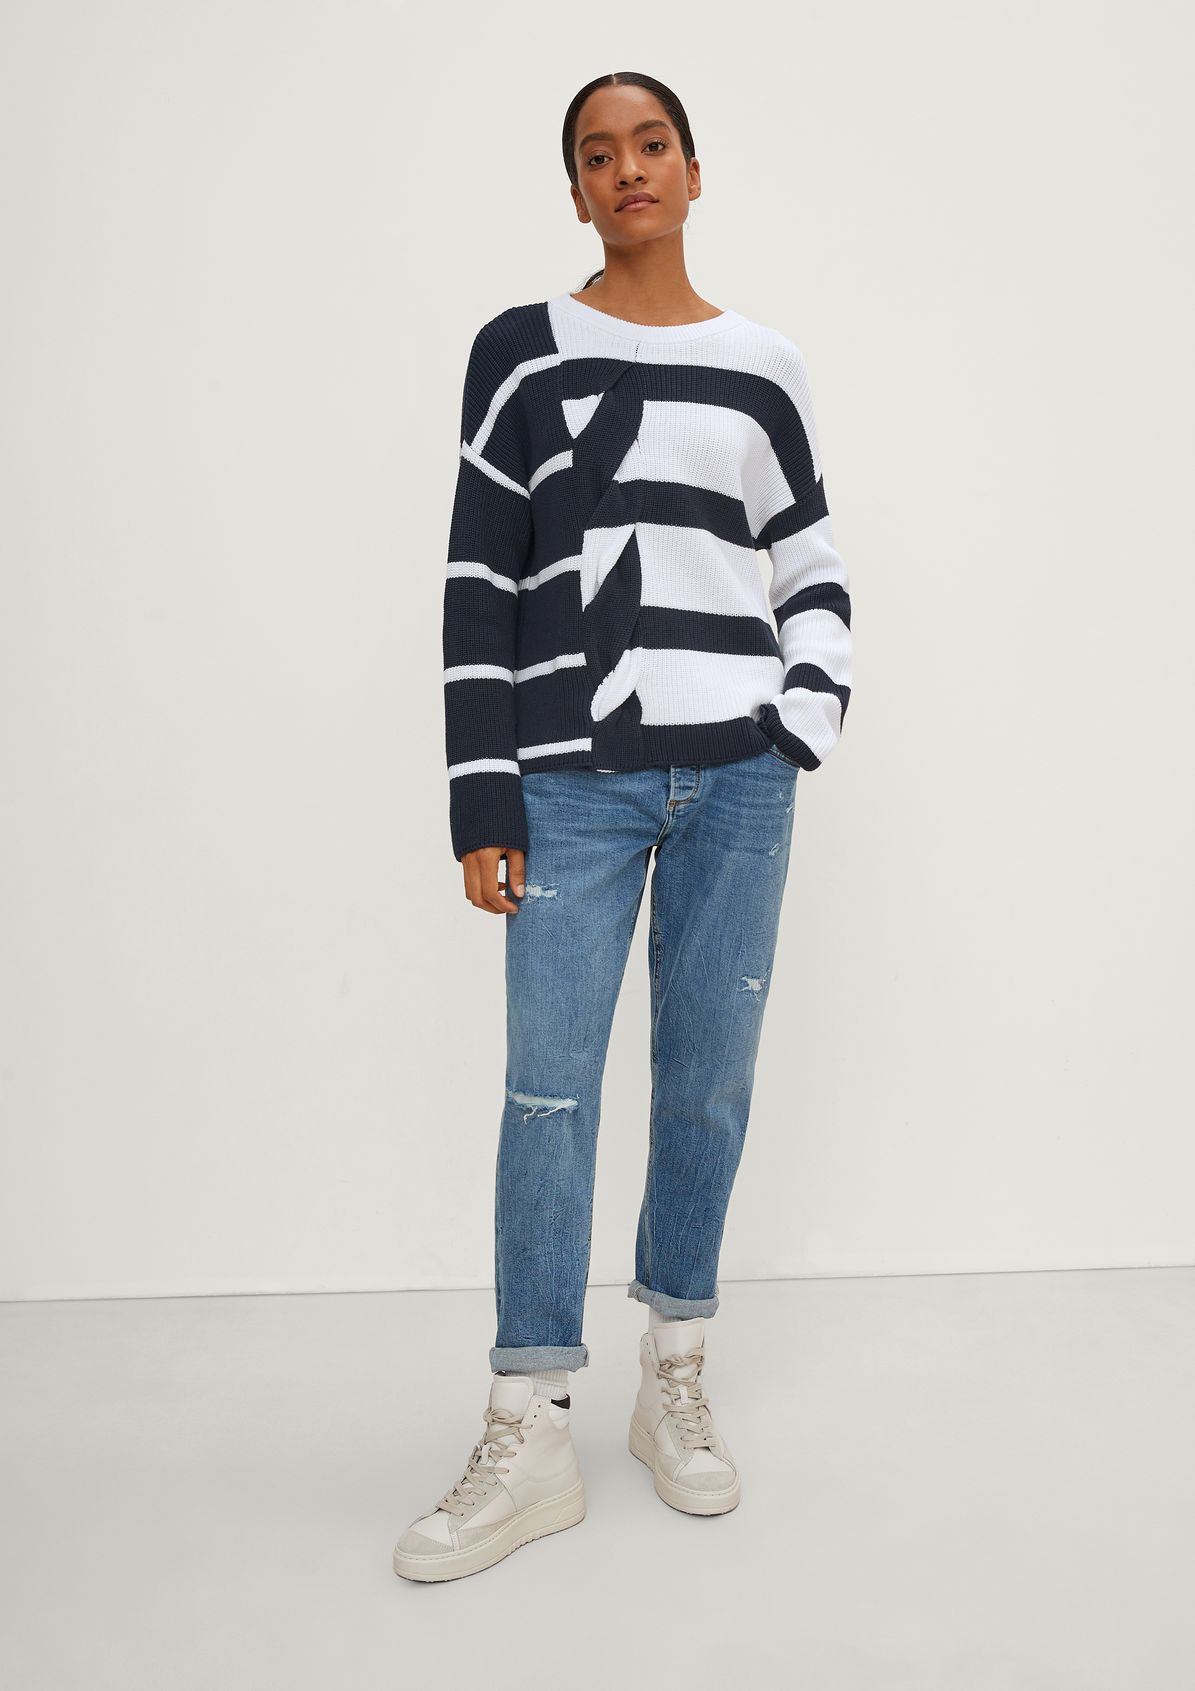 Striped jumper with a cable knit pattern from comma